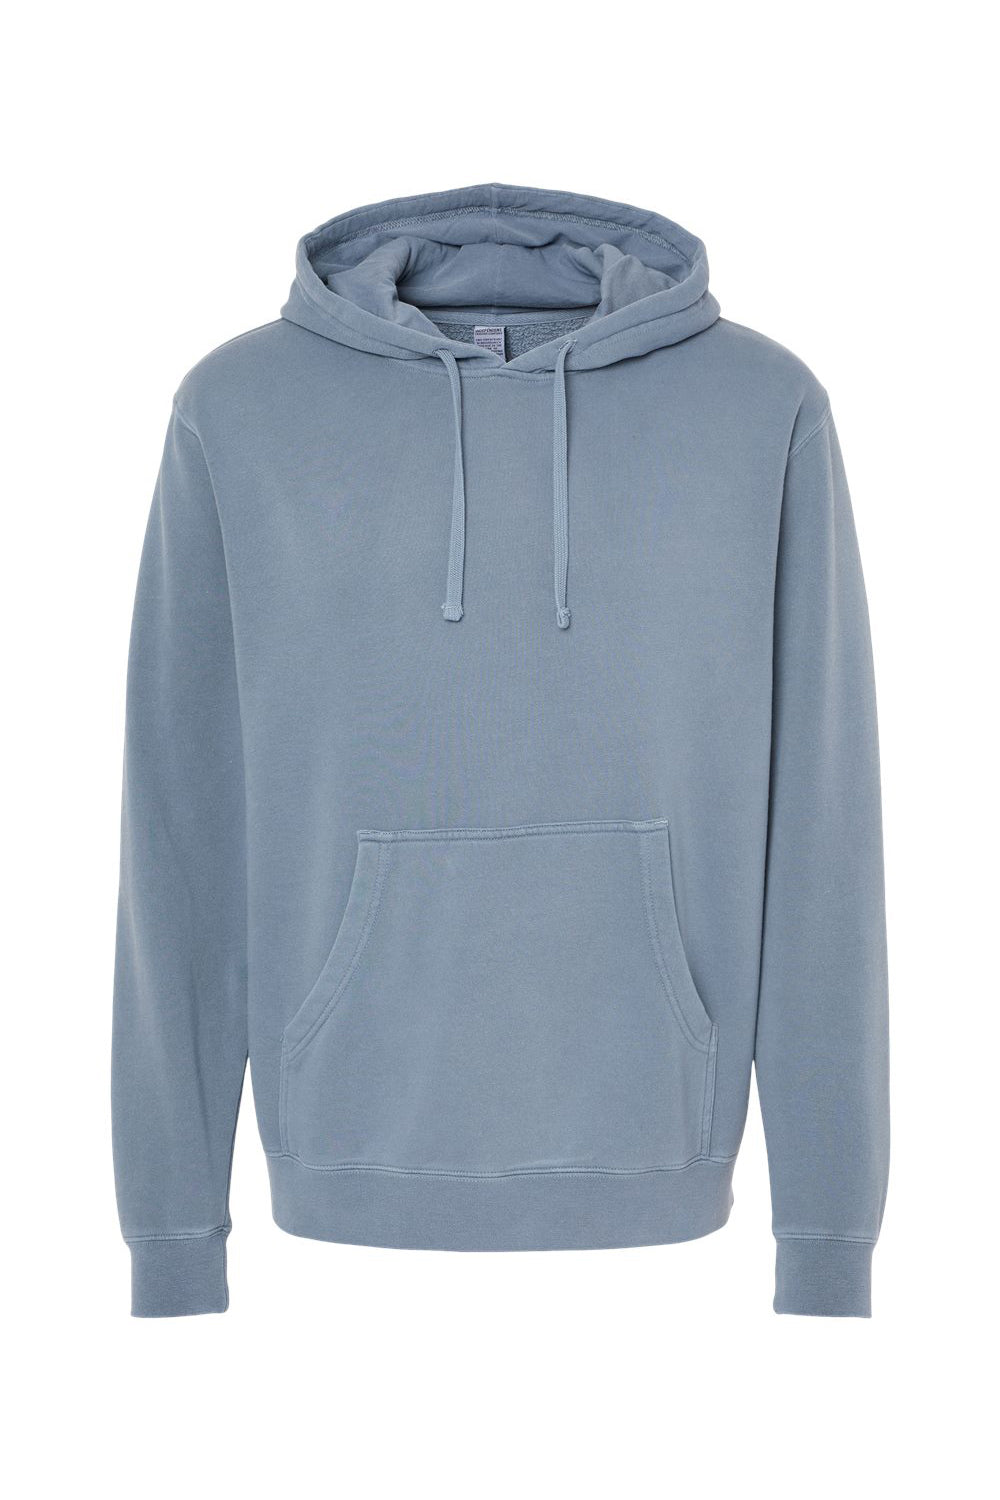 Independent Trading Co. PRM4500 Mens Pigment Dyed Hooded Sweatshirt Hoodie Slate Blue Flat Front